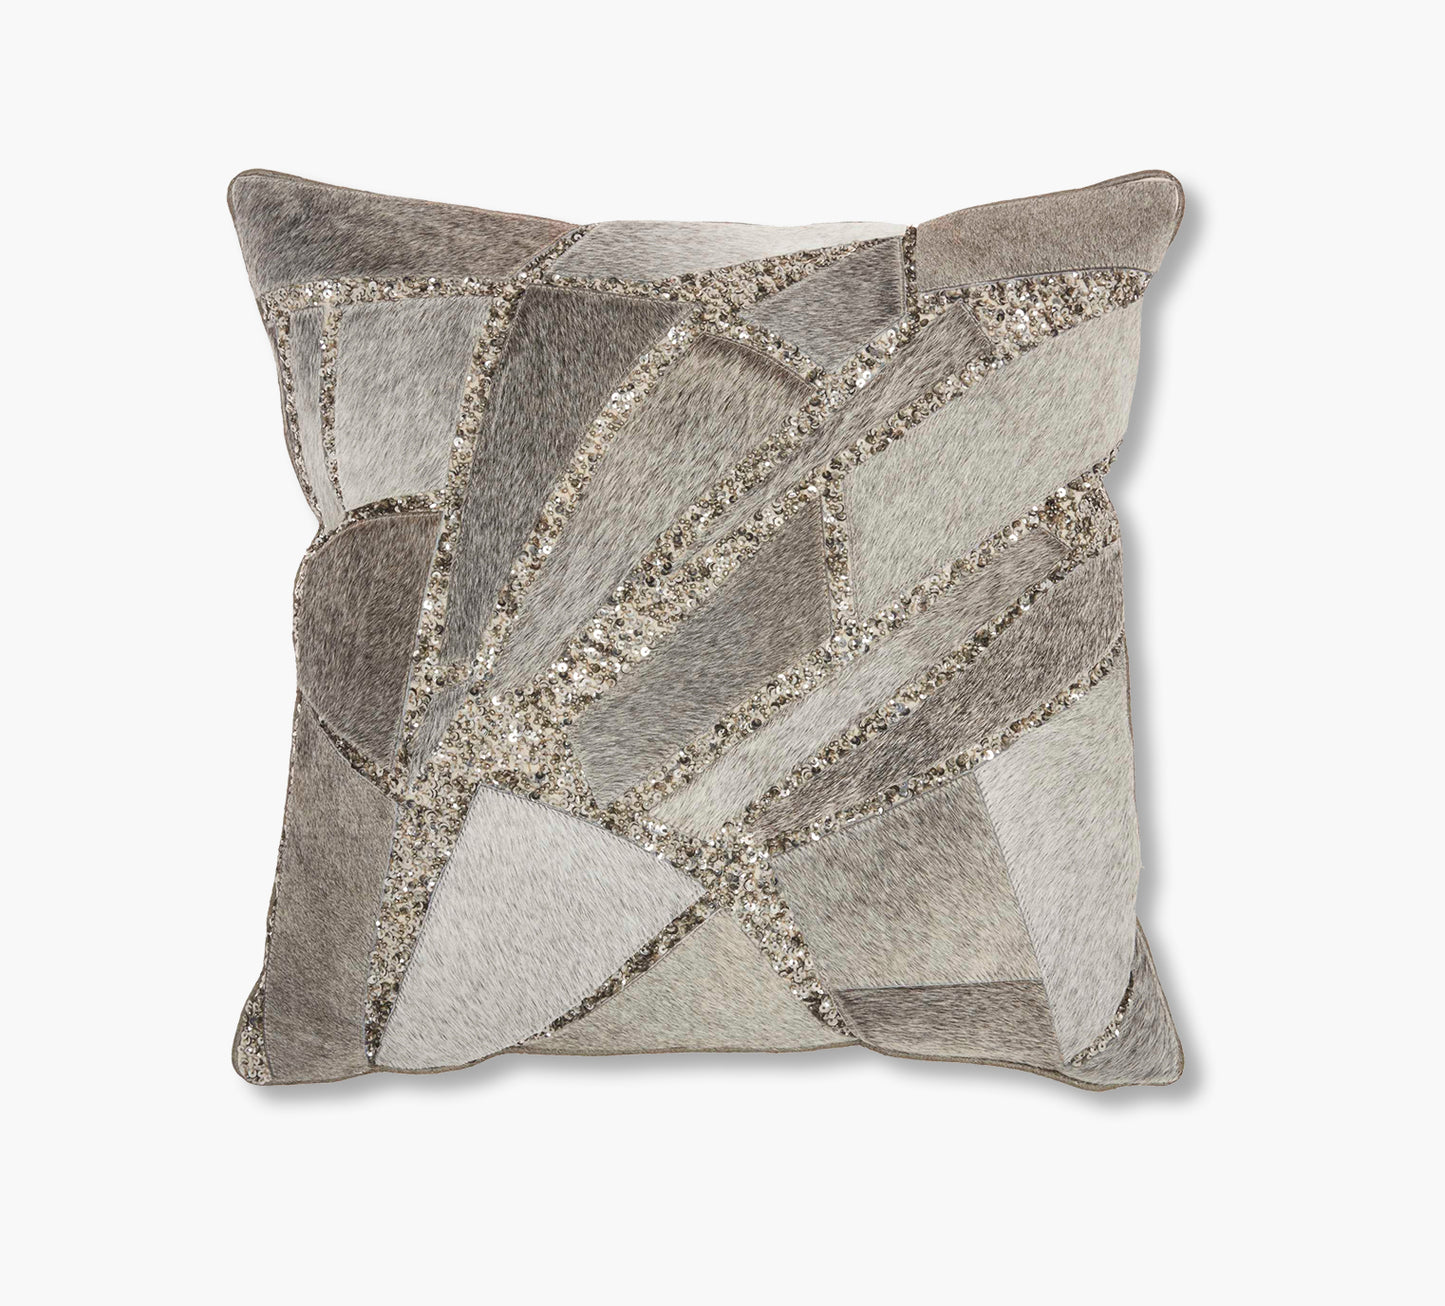 Natural Leather Hide Grey Silver pillow 18 x 18